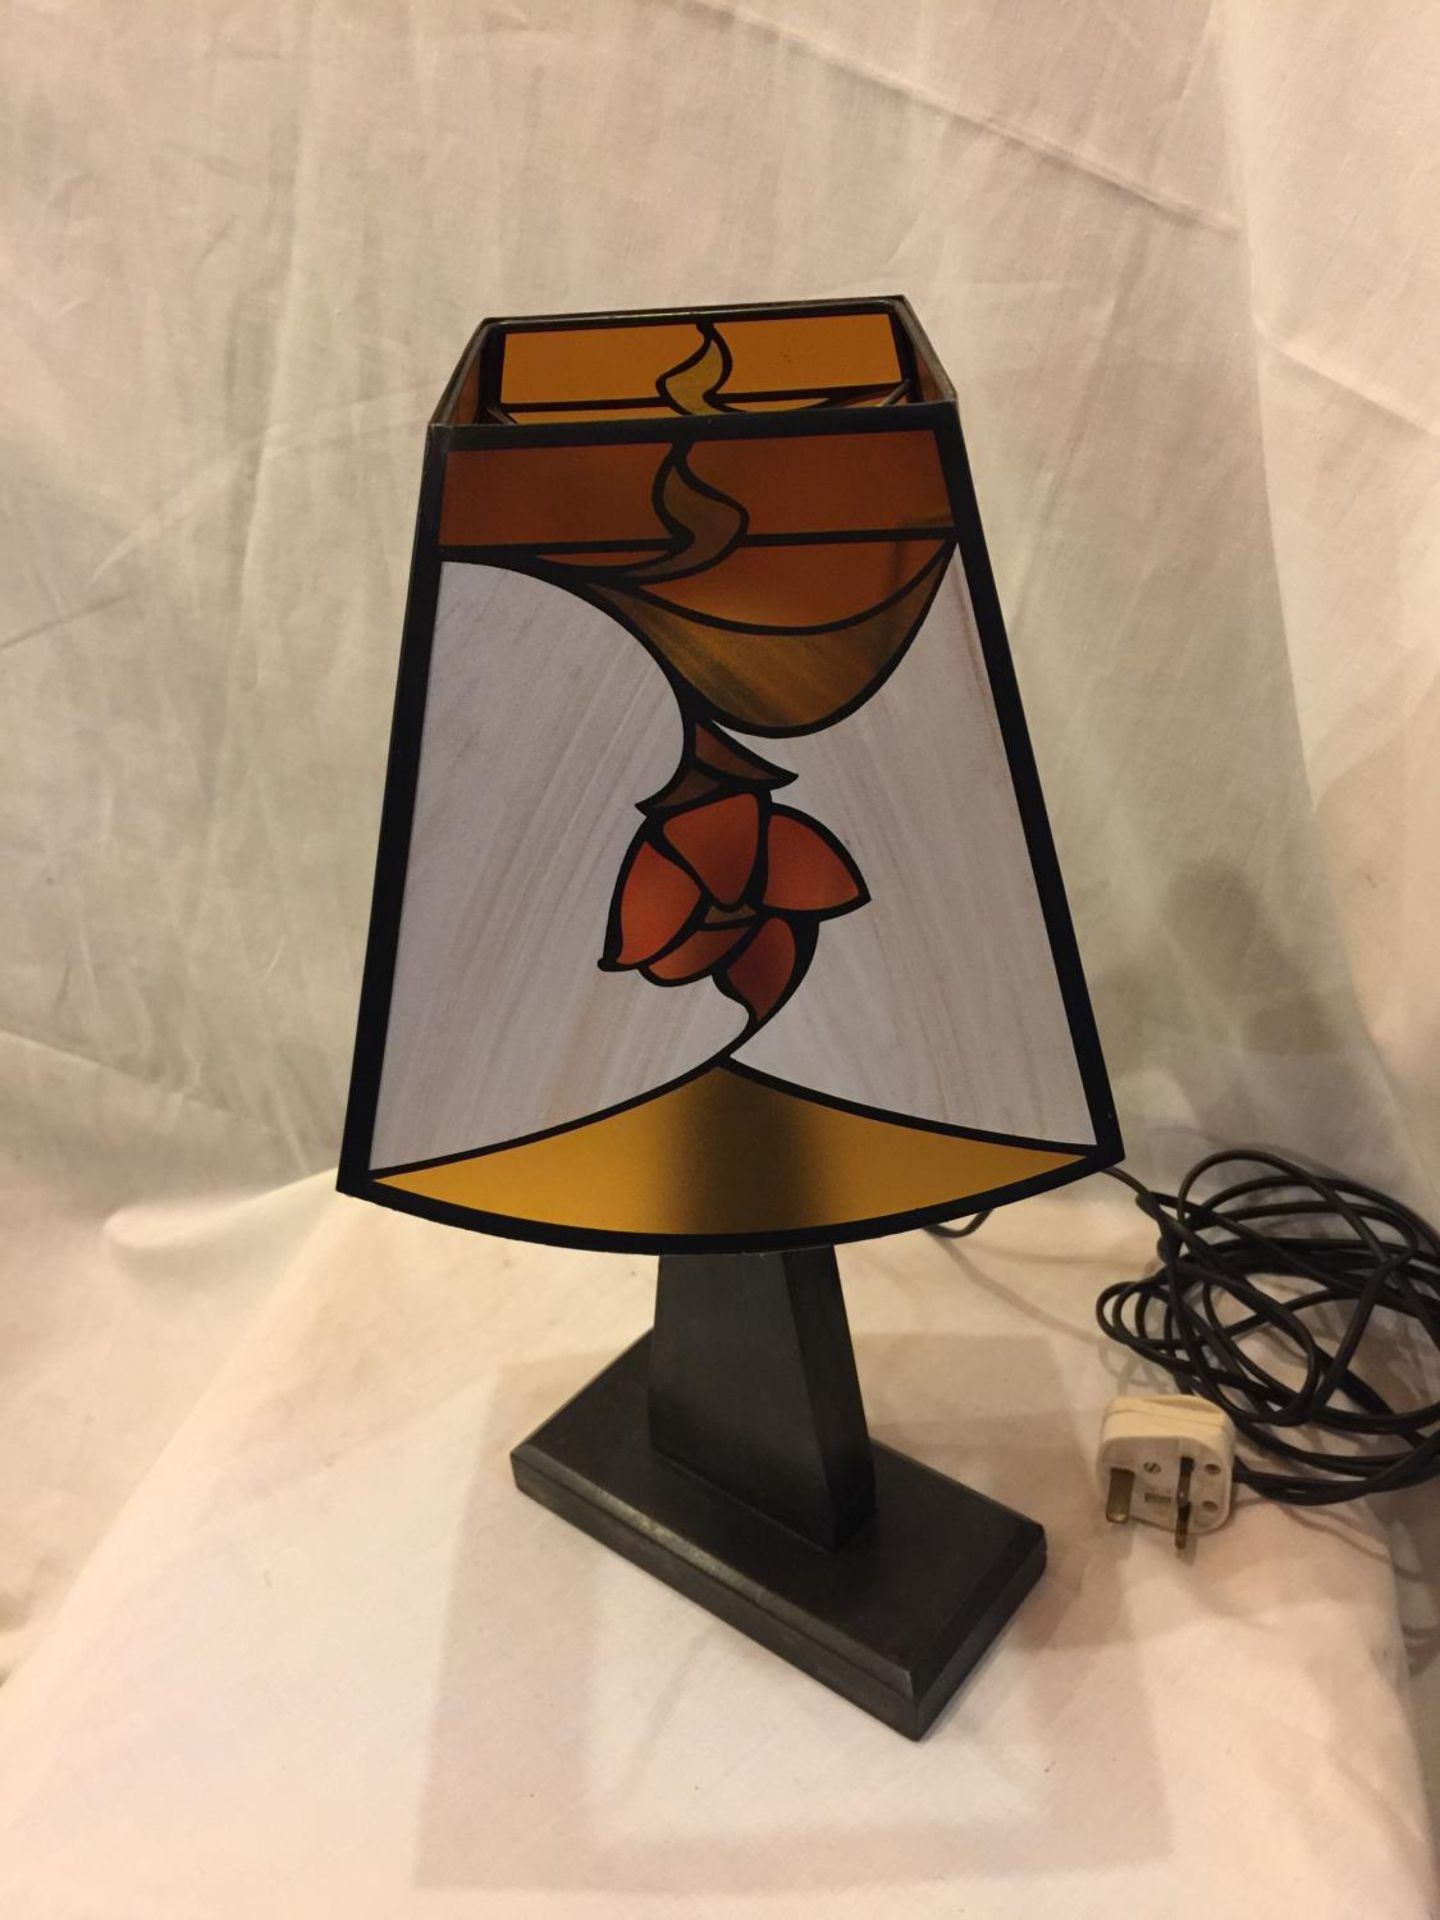 AN ART DECO STYLE TABLE LAMP - Image 2 of 4